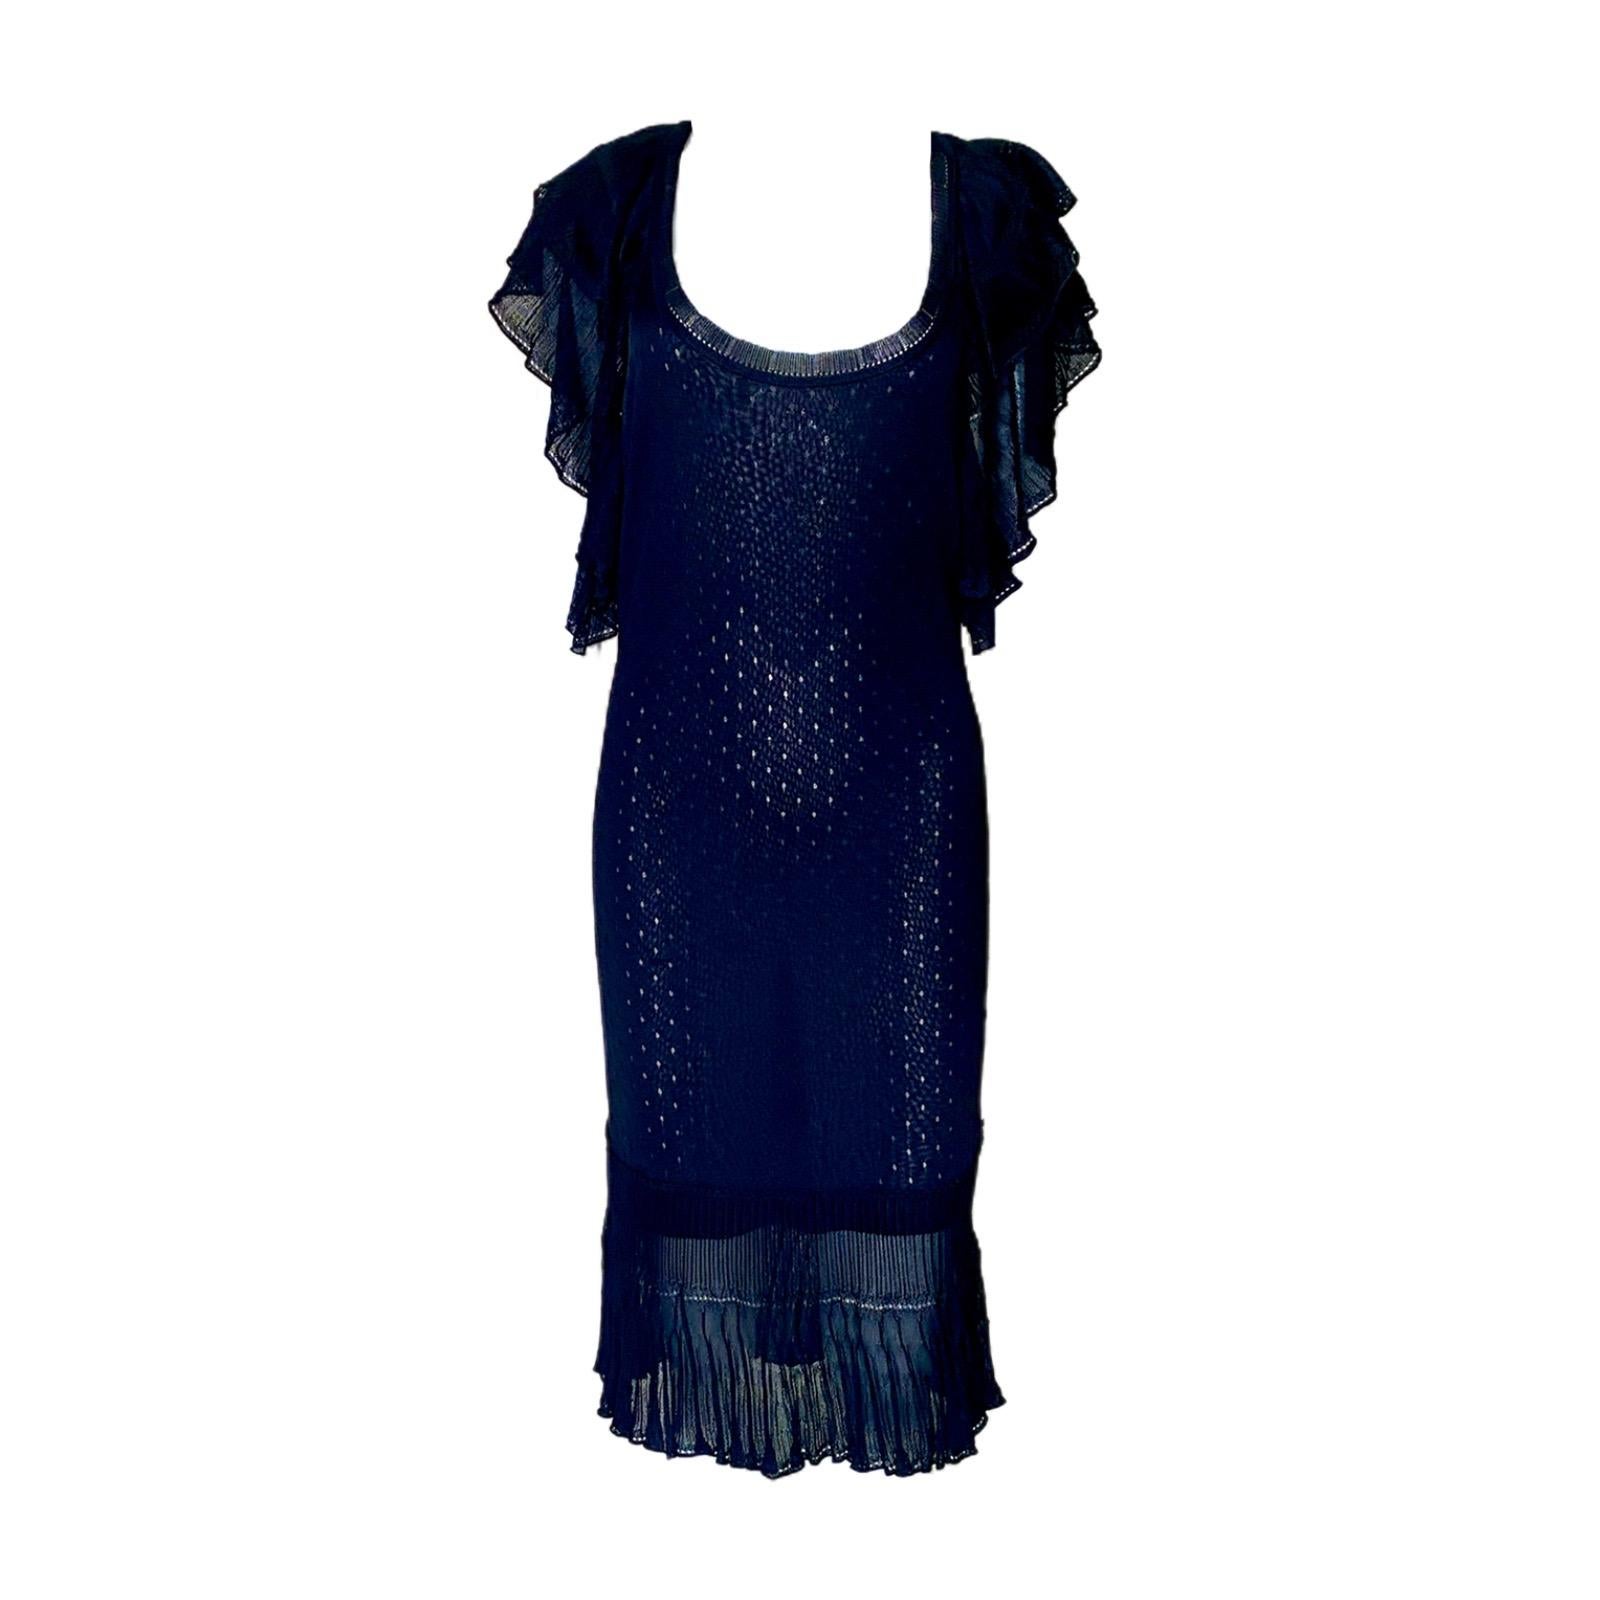 NEW John Galliano Black Crochet Knit Ruched Dress  In Excellent Condition For Sale In Switzerland, CH